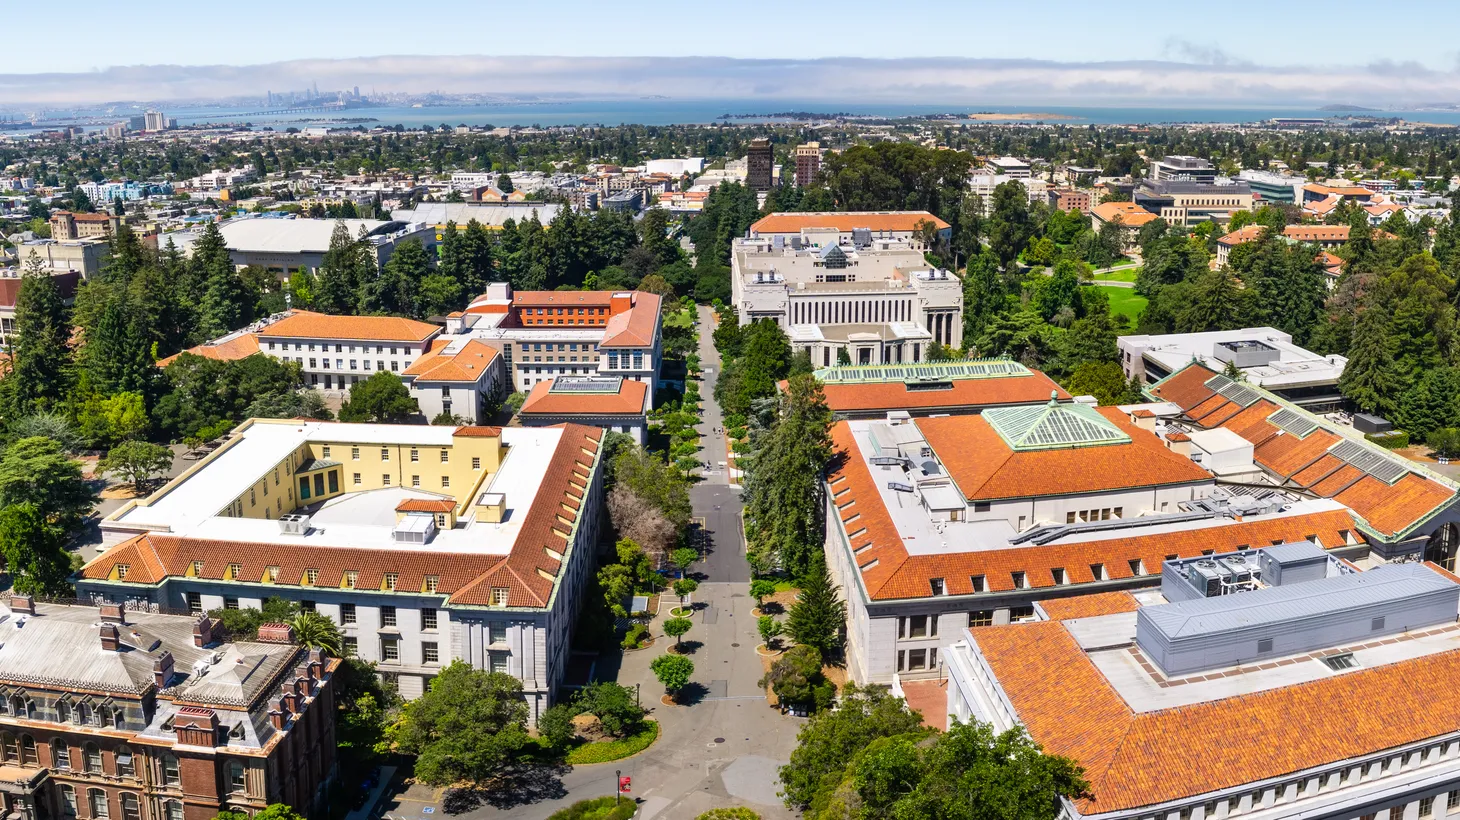 A panoramic view shows the campus of UC Berkeley in San Francisco. Berkeley, along with UCLA and Stanford, are the California schools that have so far withdrawn from U.S. News and World Report’s rankings of colleges and universities.